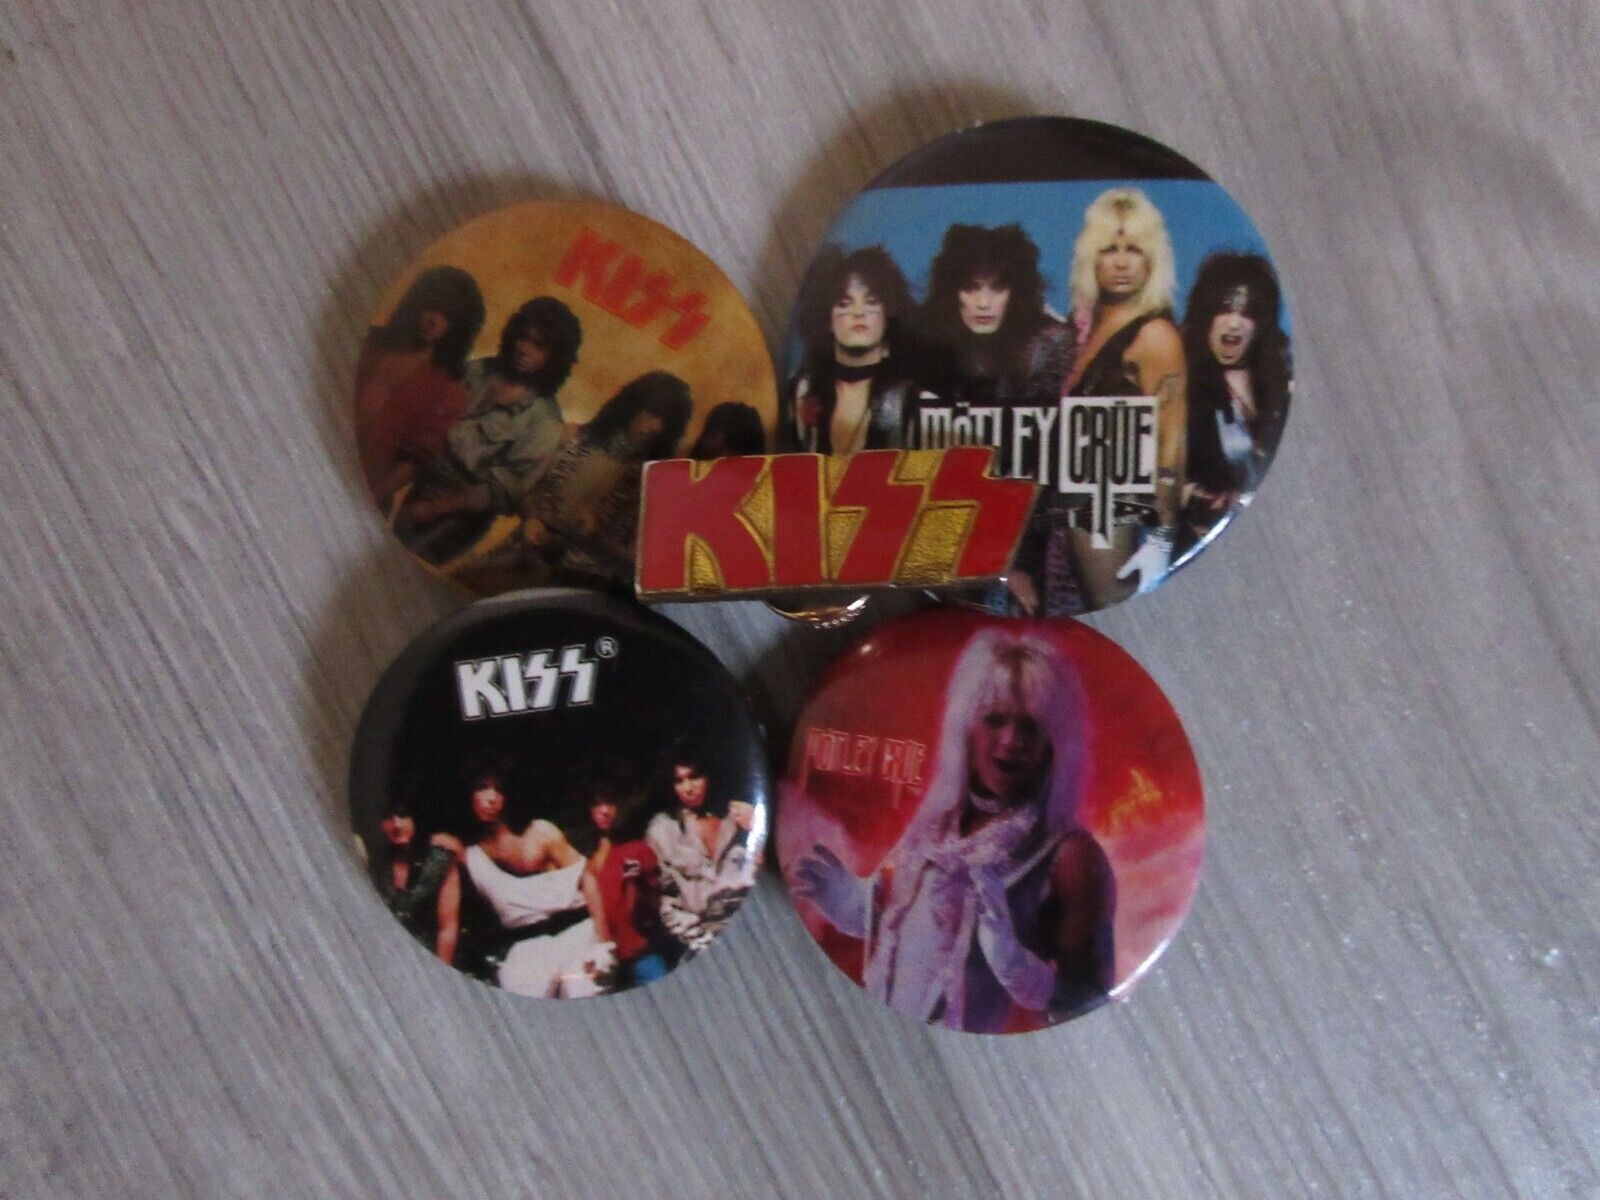 Rare Lot of 5 Vintage 80s Buttons Pins Heavy Metal Bands Kiss and Motley Crue